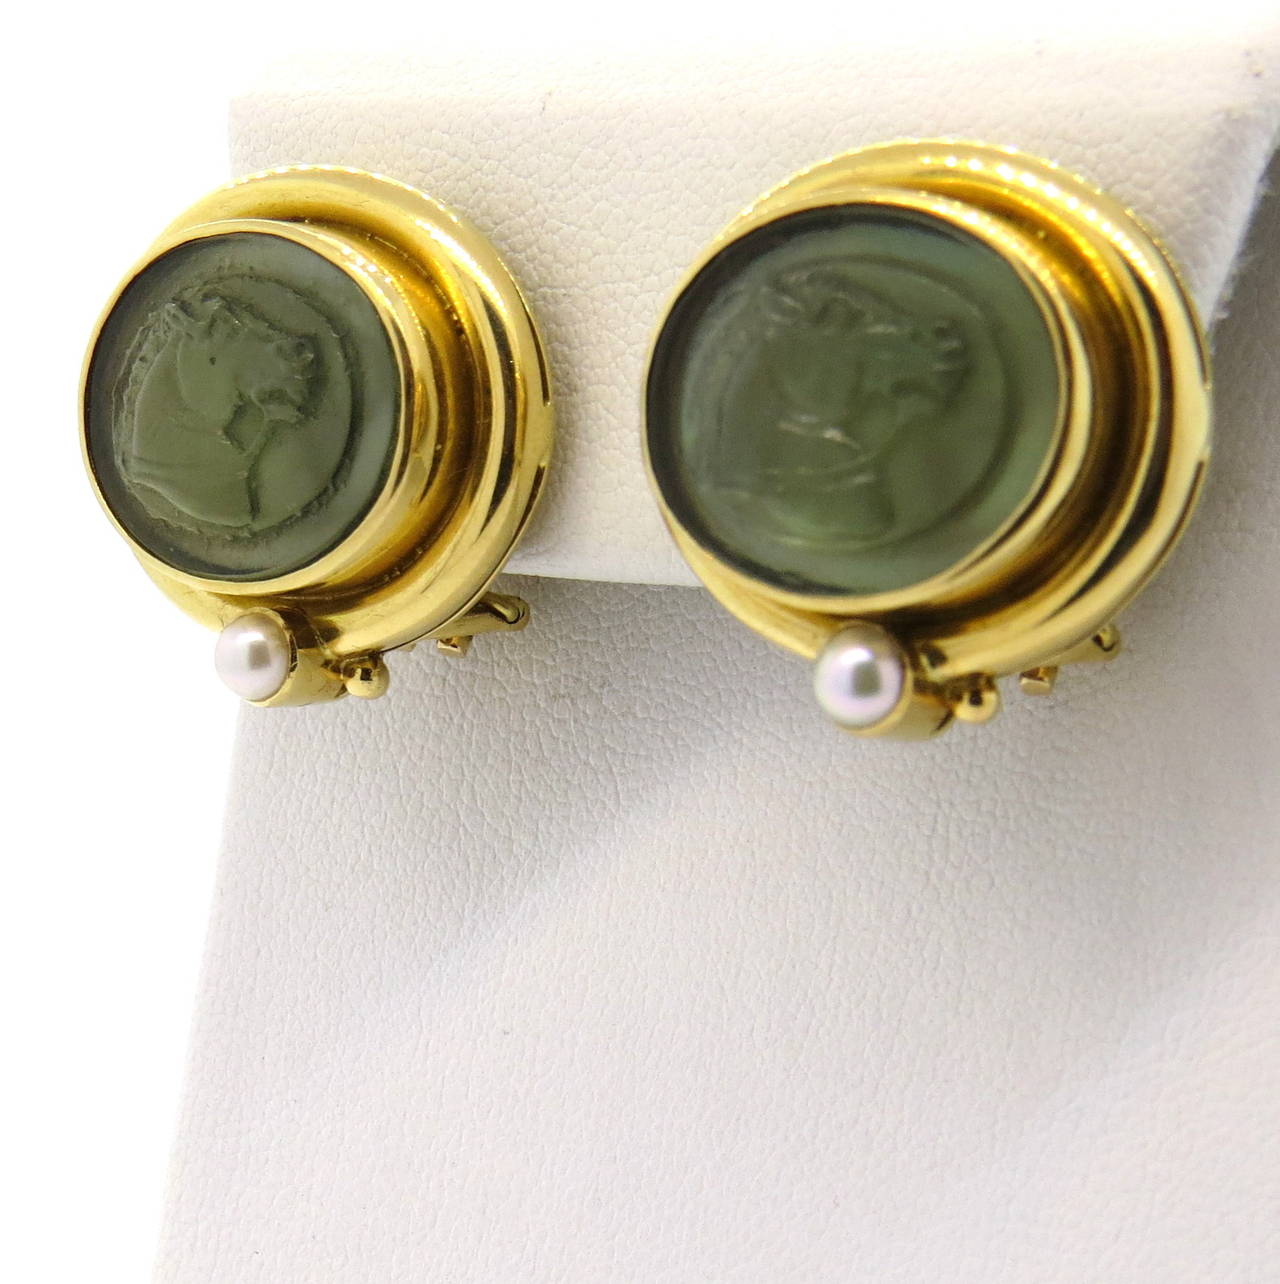 A pair of 18k yellow gold earrings with carved venetian glass depicting horses adorned with 4.4mm pearls.  Crafted by Elizabeth Locke, the earrings measure 25mm x 23mm and weigh 18.5 grams.